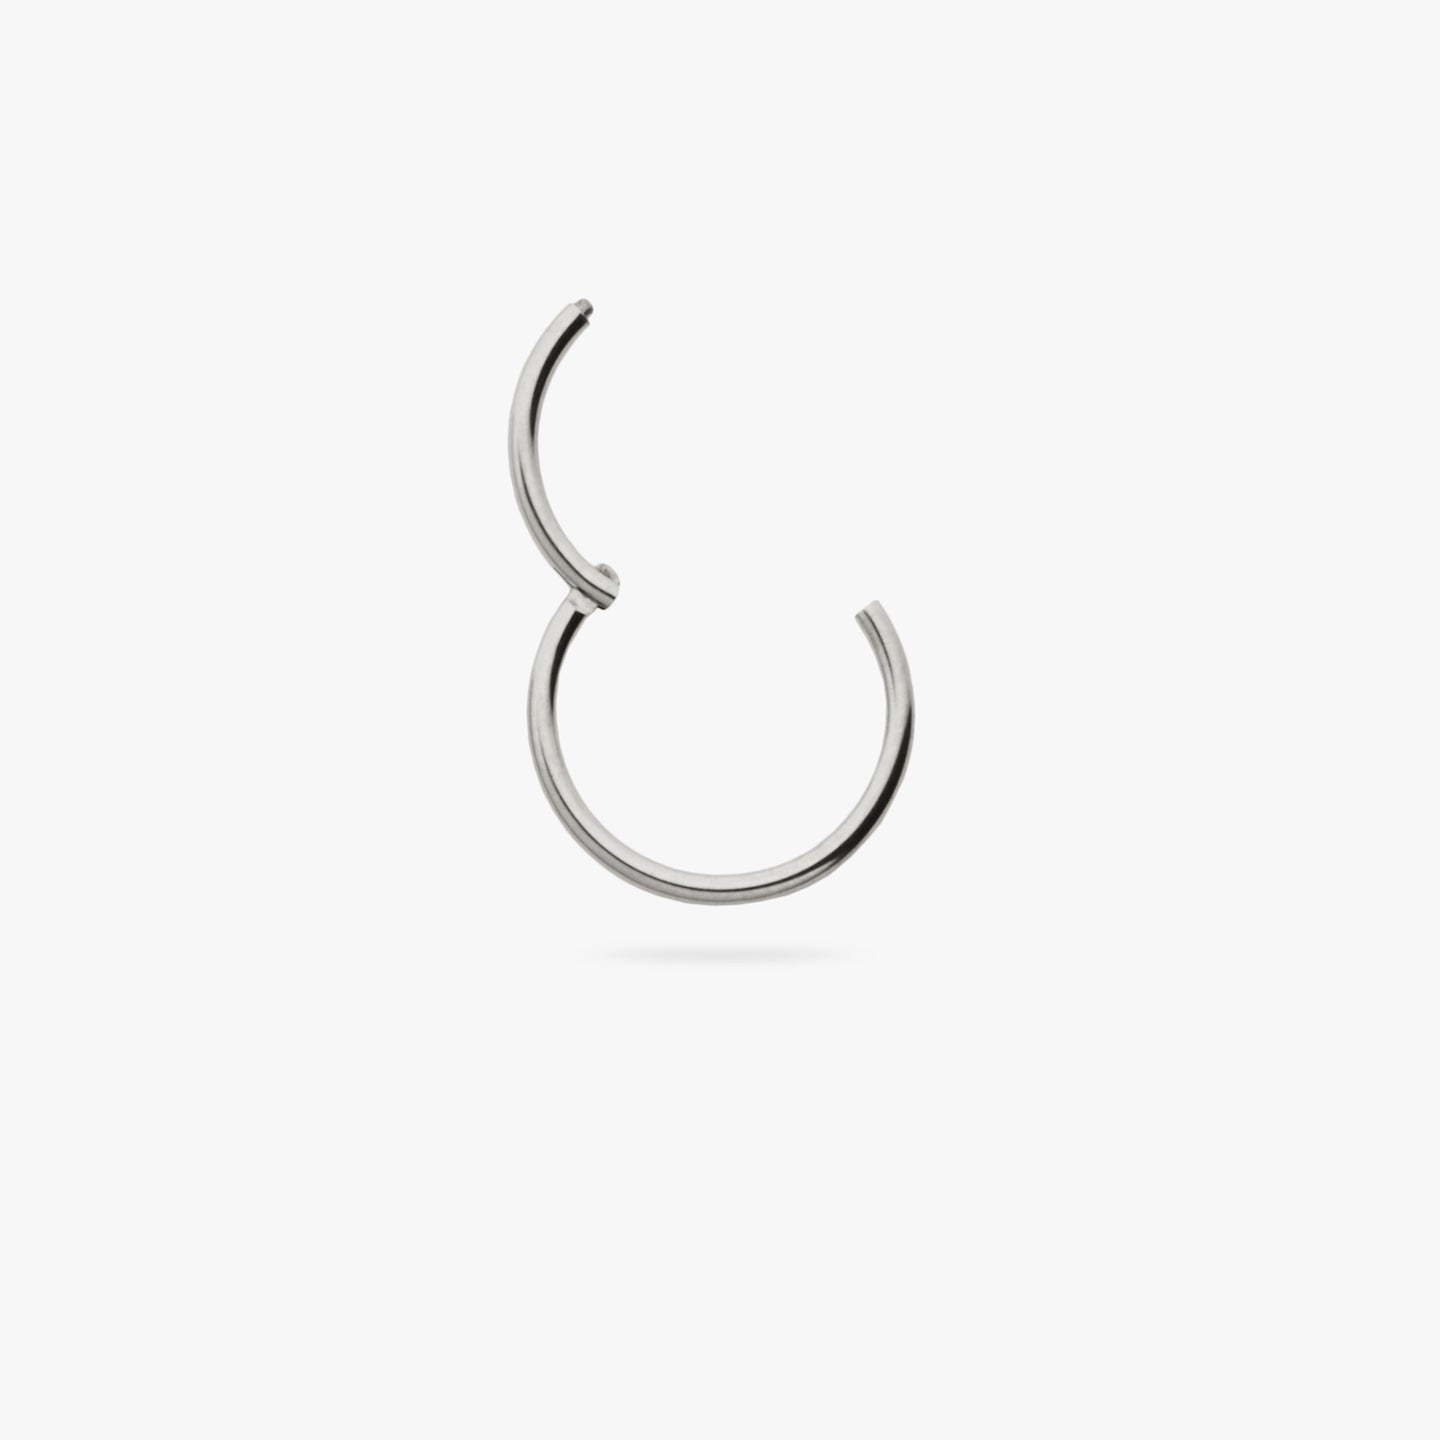 This is a silver clicker earring color:null|silver